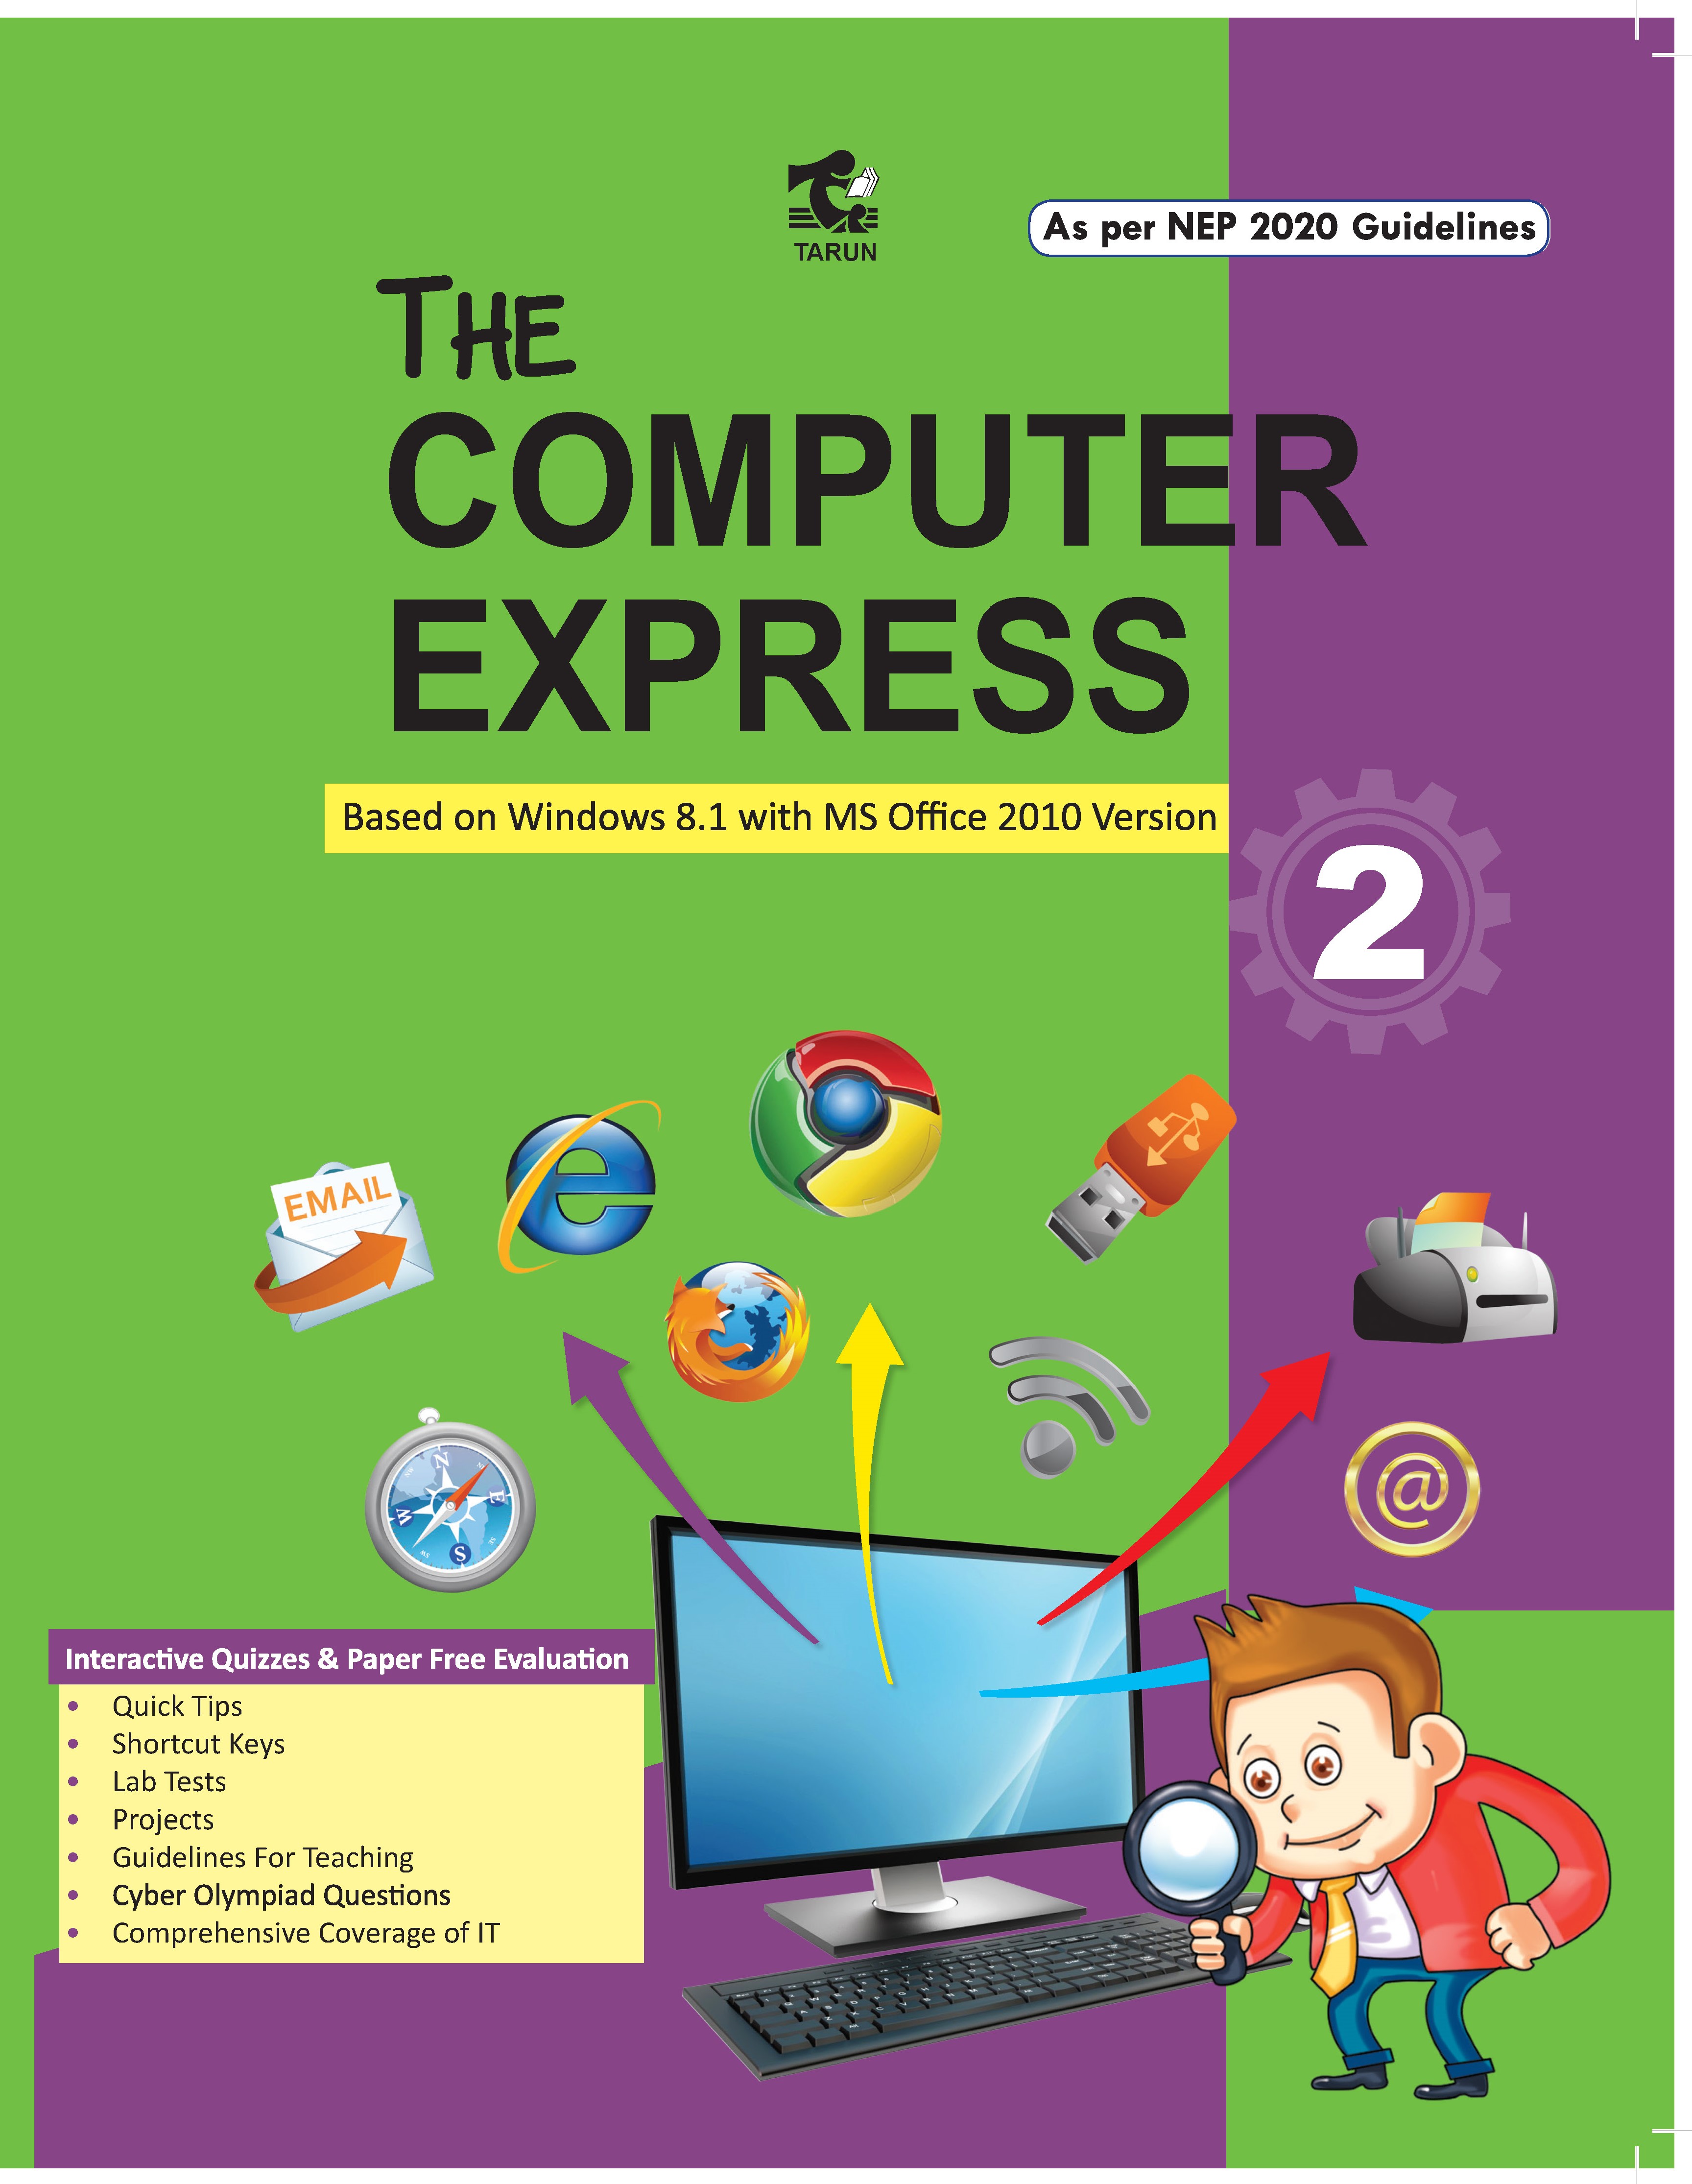 THE COMPUTER EXPRESS 2